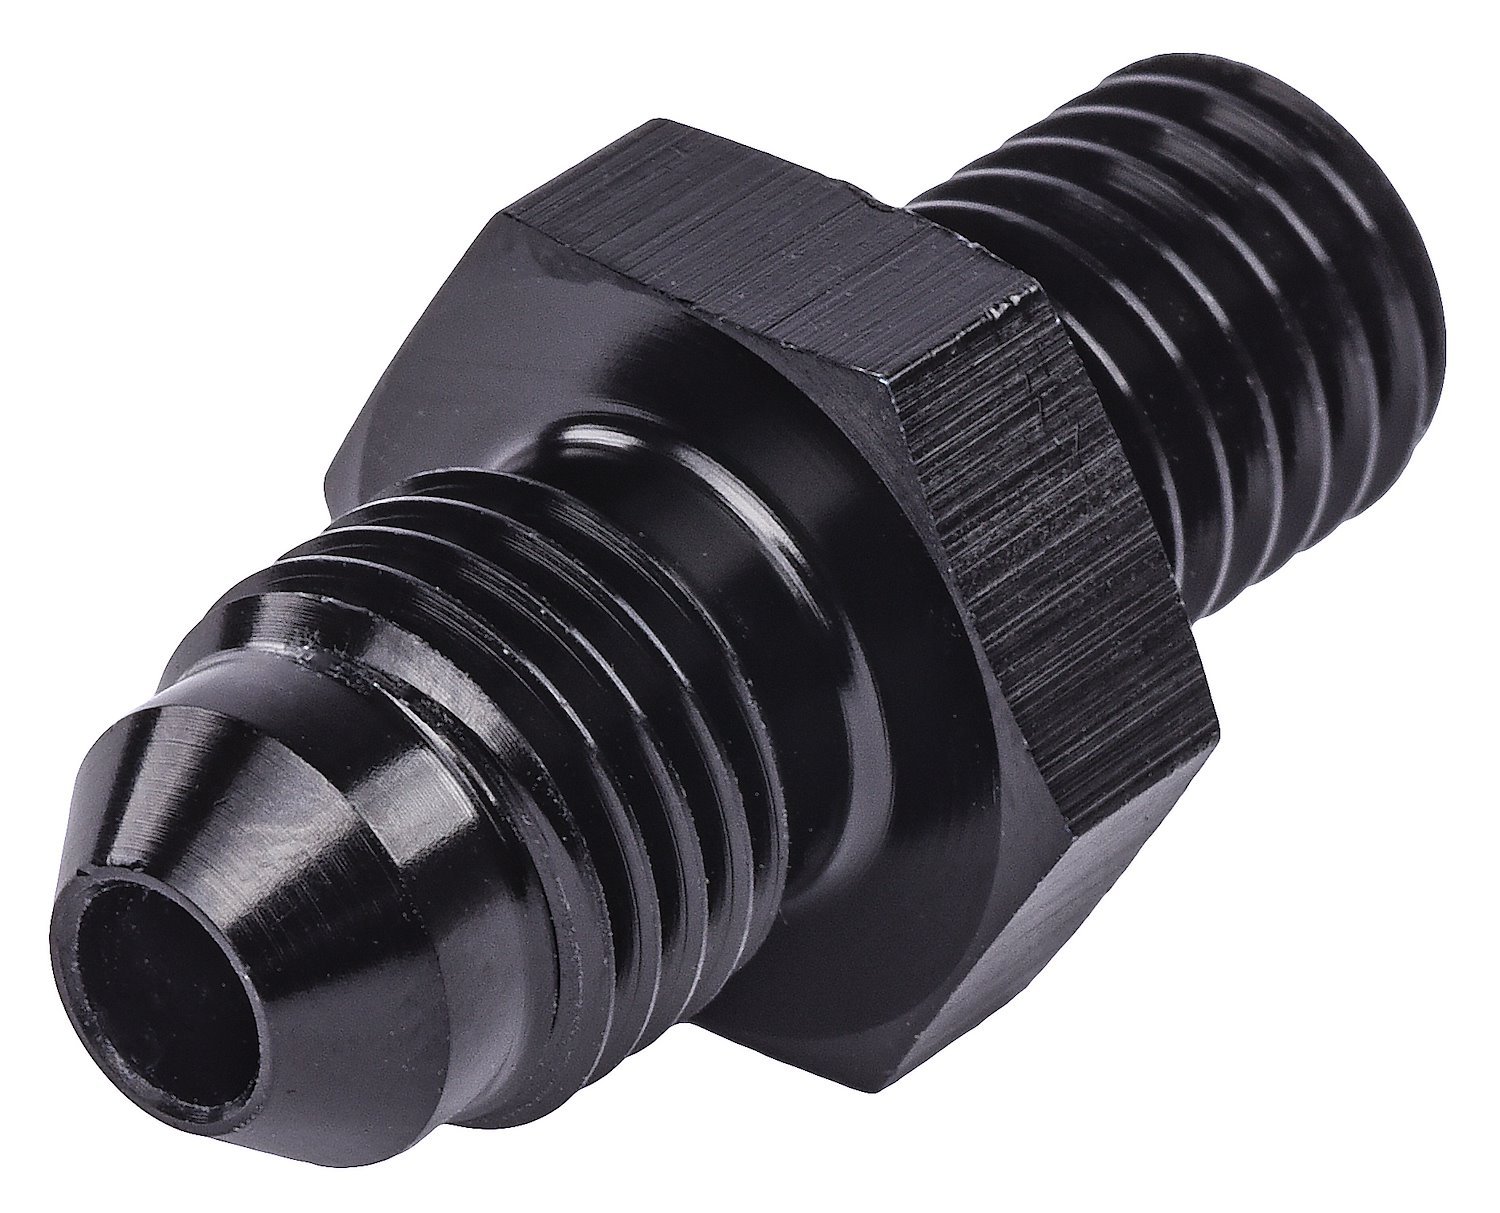 AN to Metric Adapter Fitting [-4 AN Male to 12mm x 1.25 Male, Black]